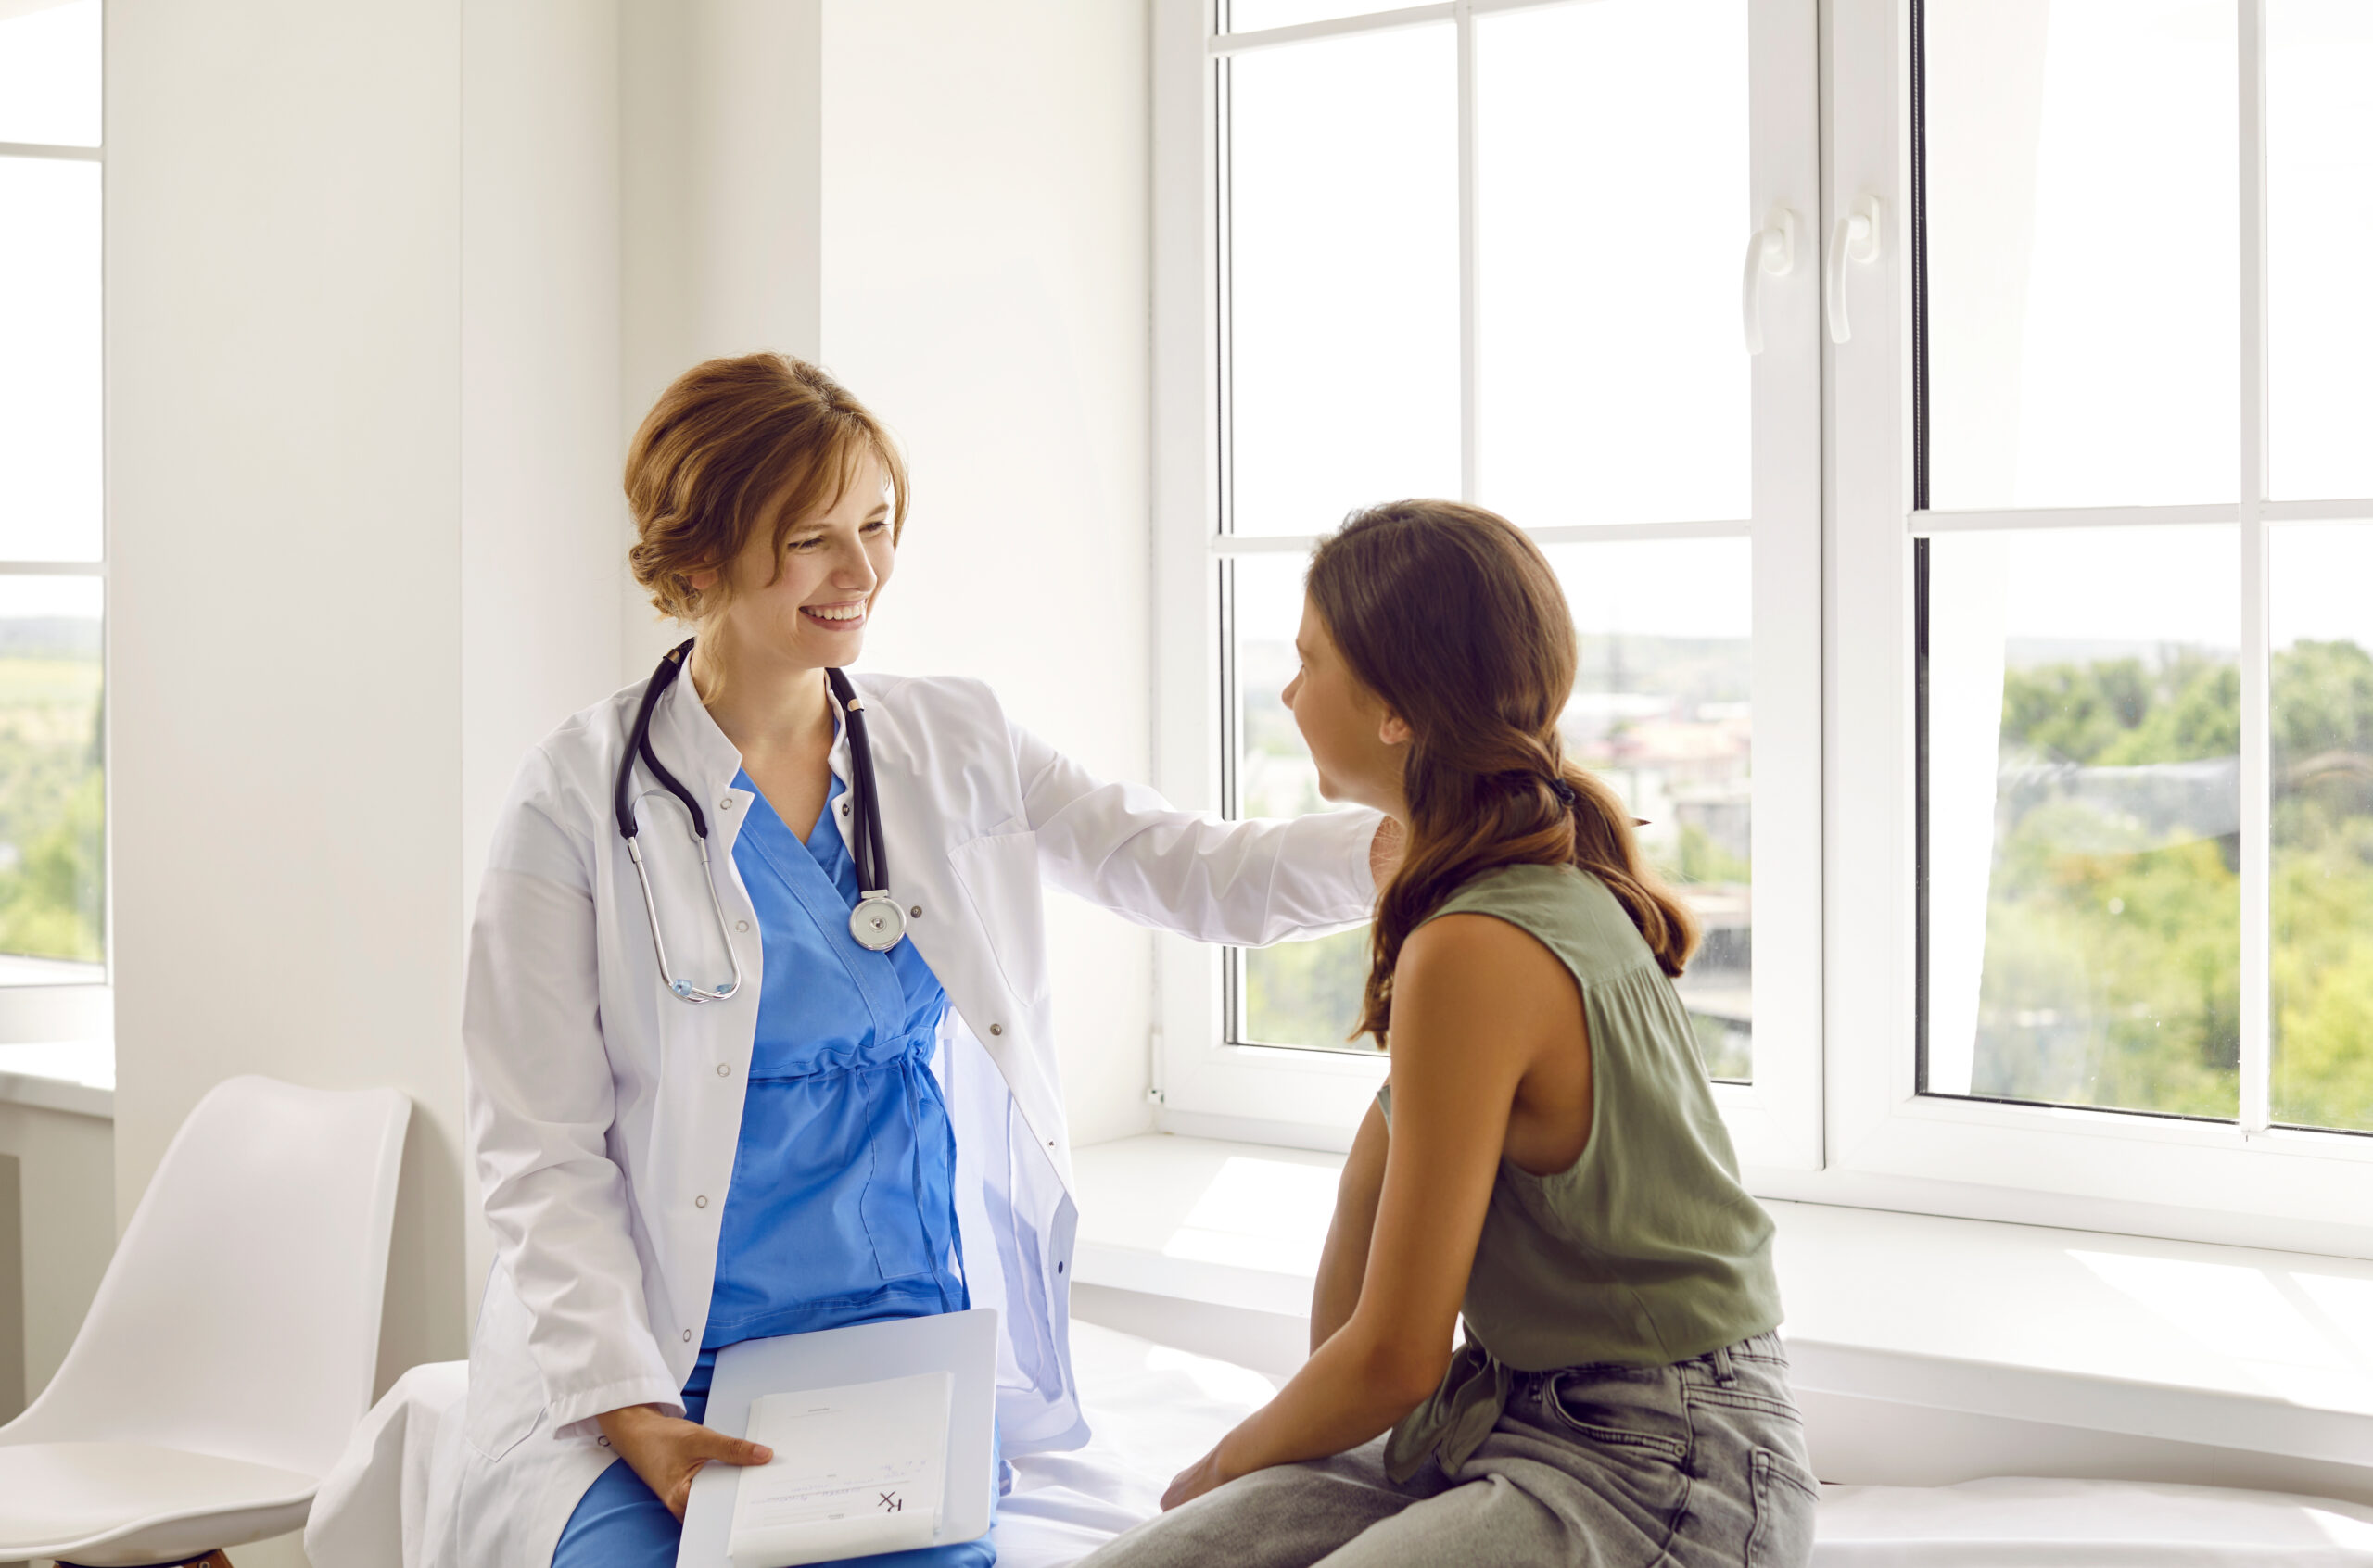 4 Benefits of Locum Tenens for Both MDs and DOs